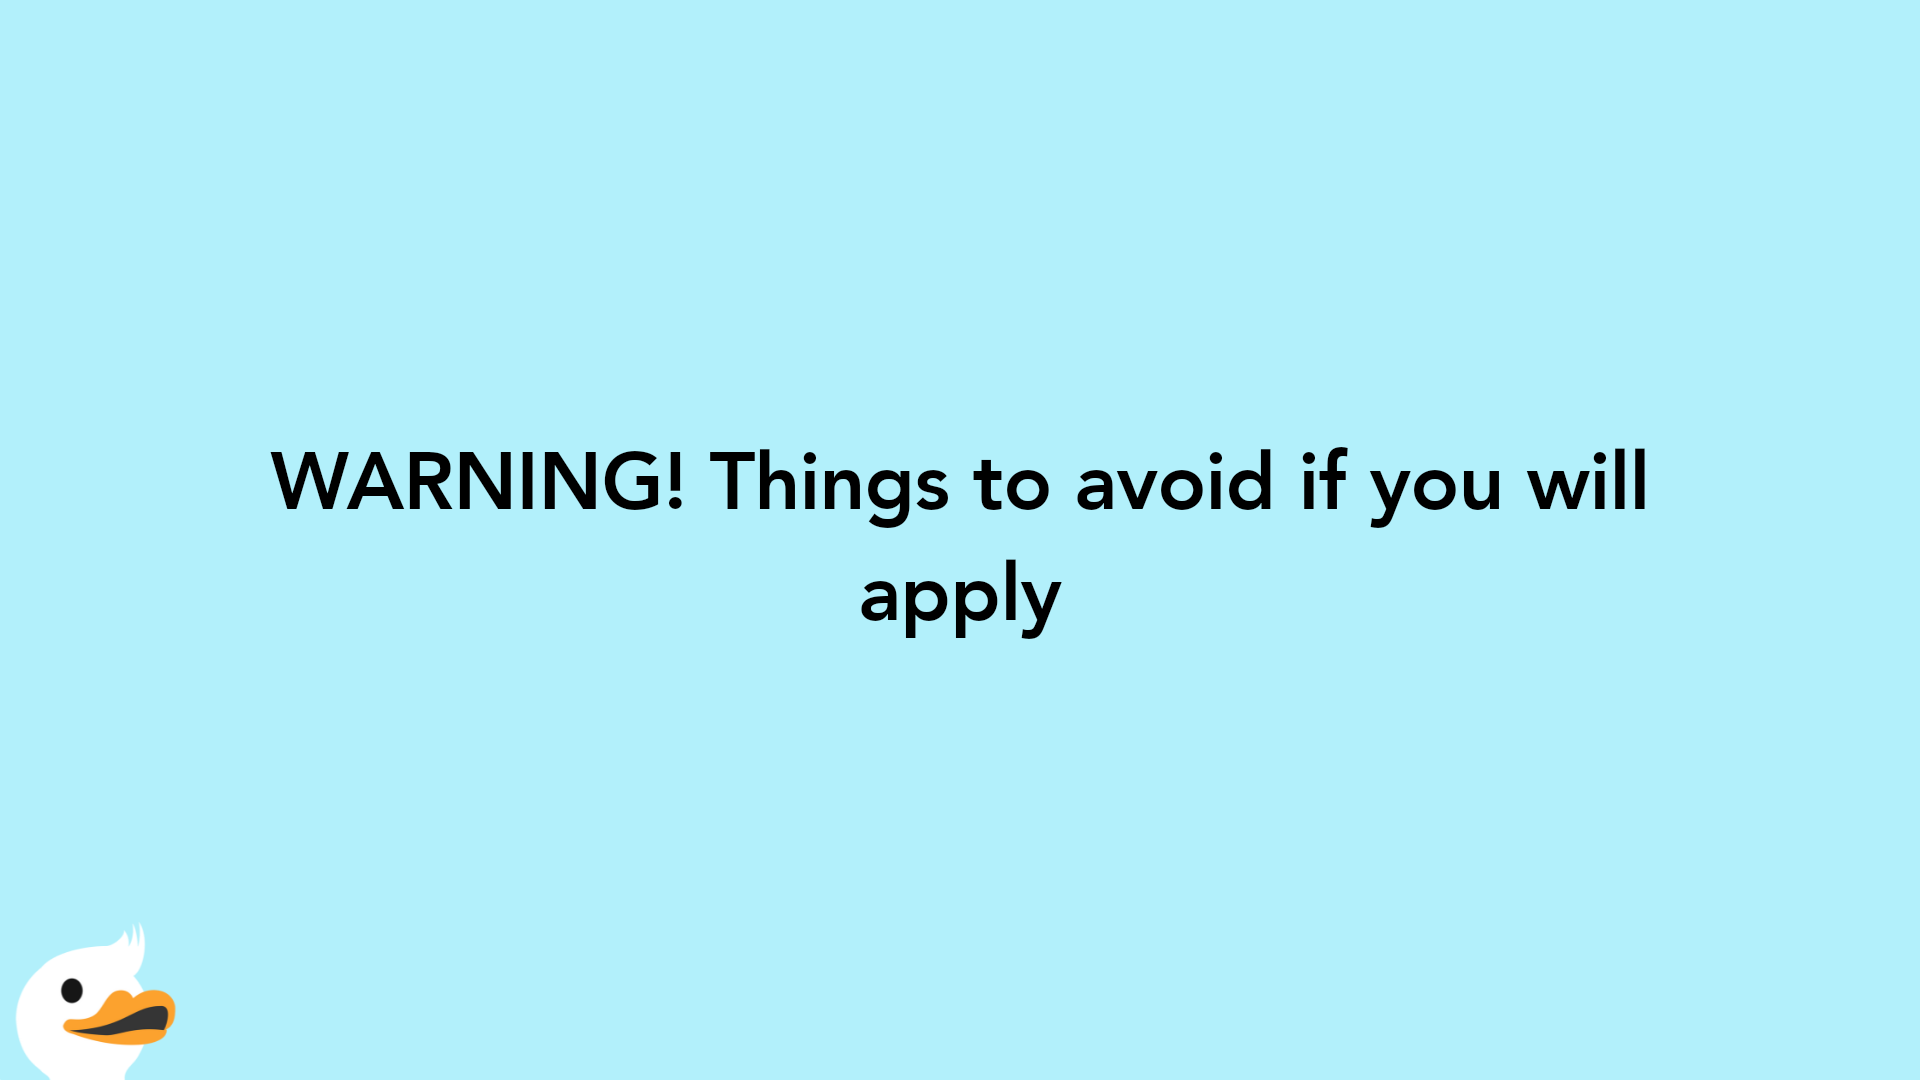 WARNING! Things to avoid if you will apply